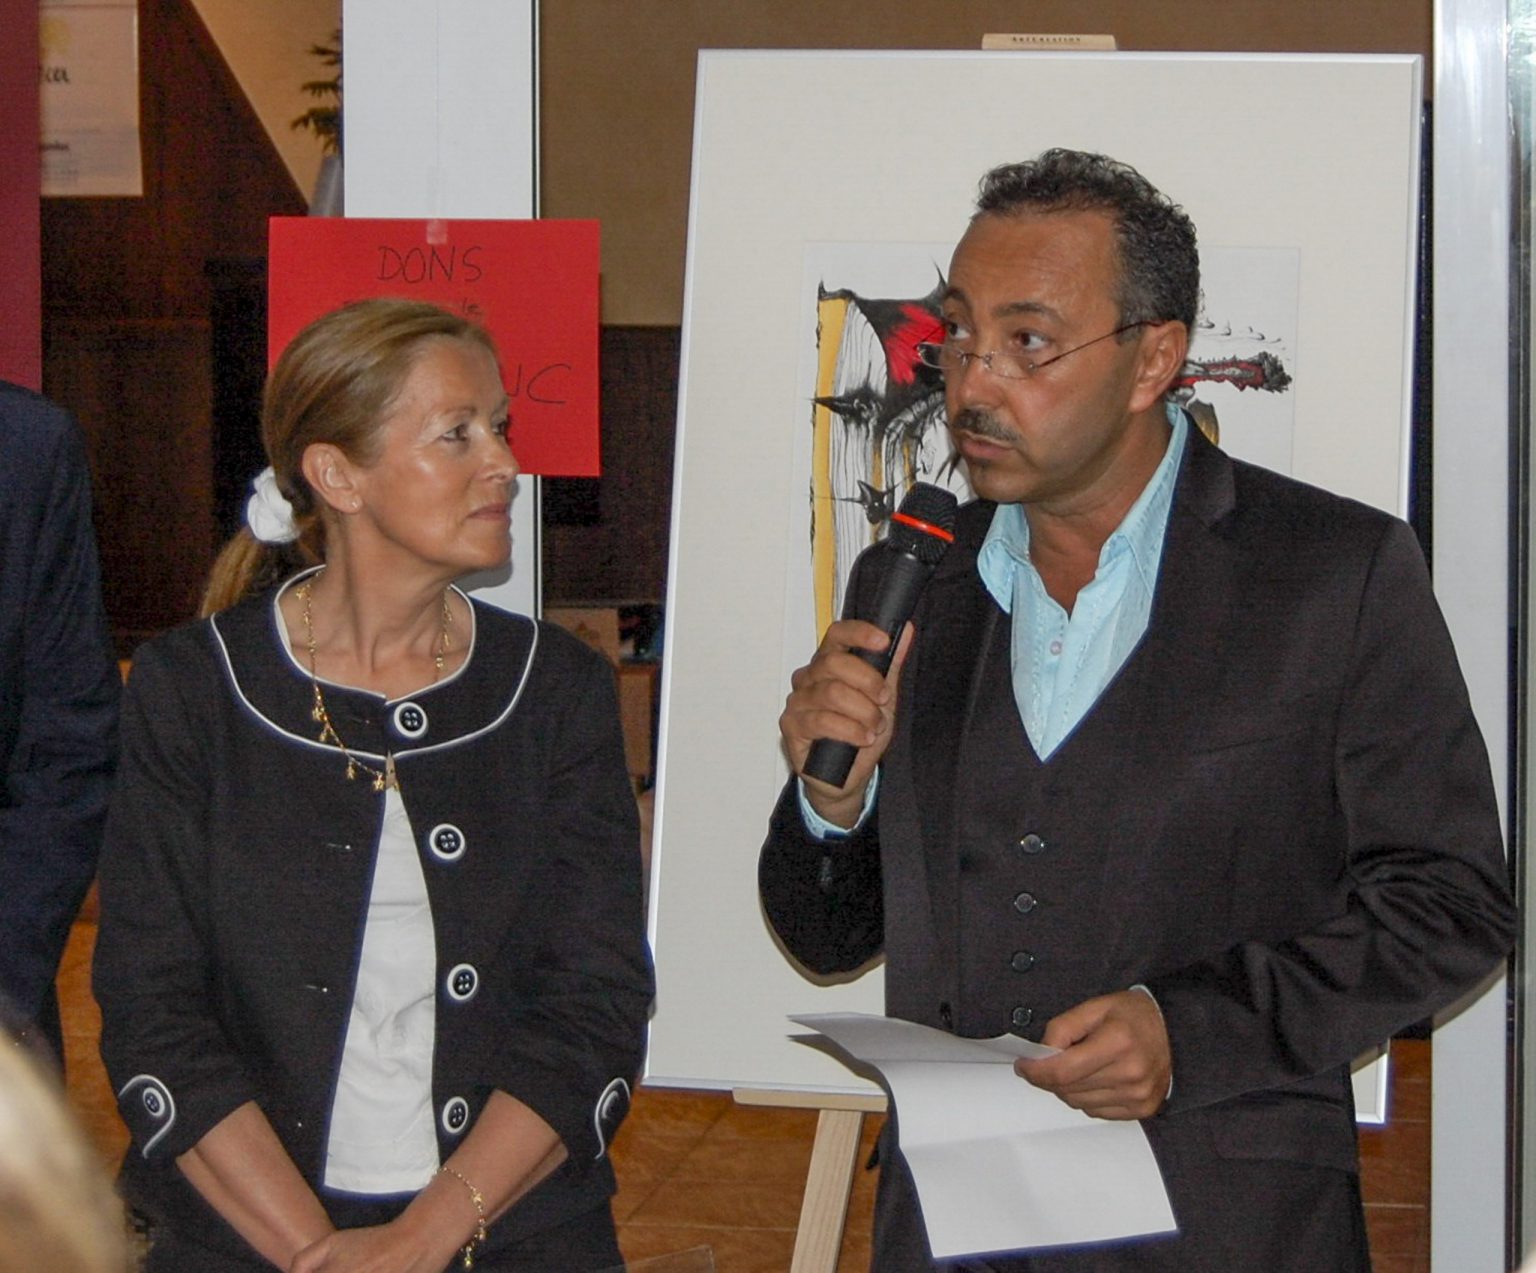 Impressionist Artist Painter Antoine Gaber during the exclusive inauguration of the PASSION FOR LIFE Fundraising vernissage held at La Rose des Vents in Plage du Larvotto, Monaco